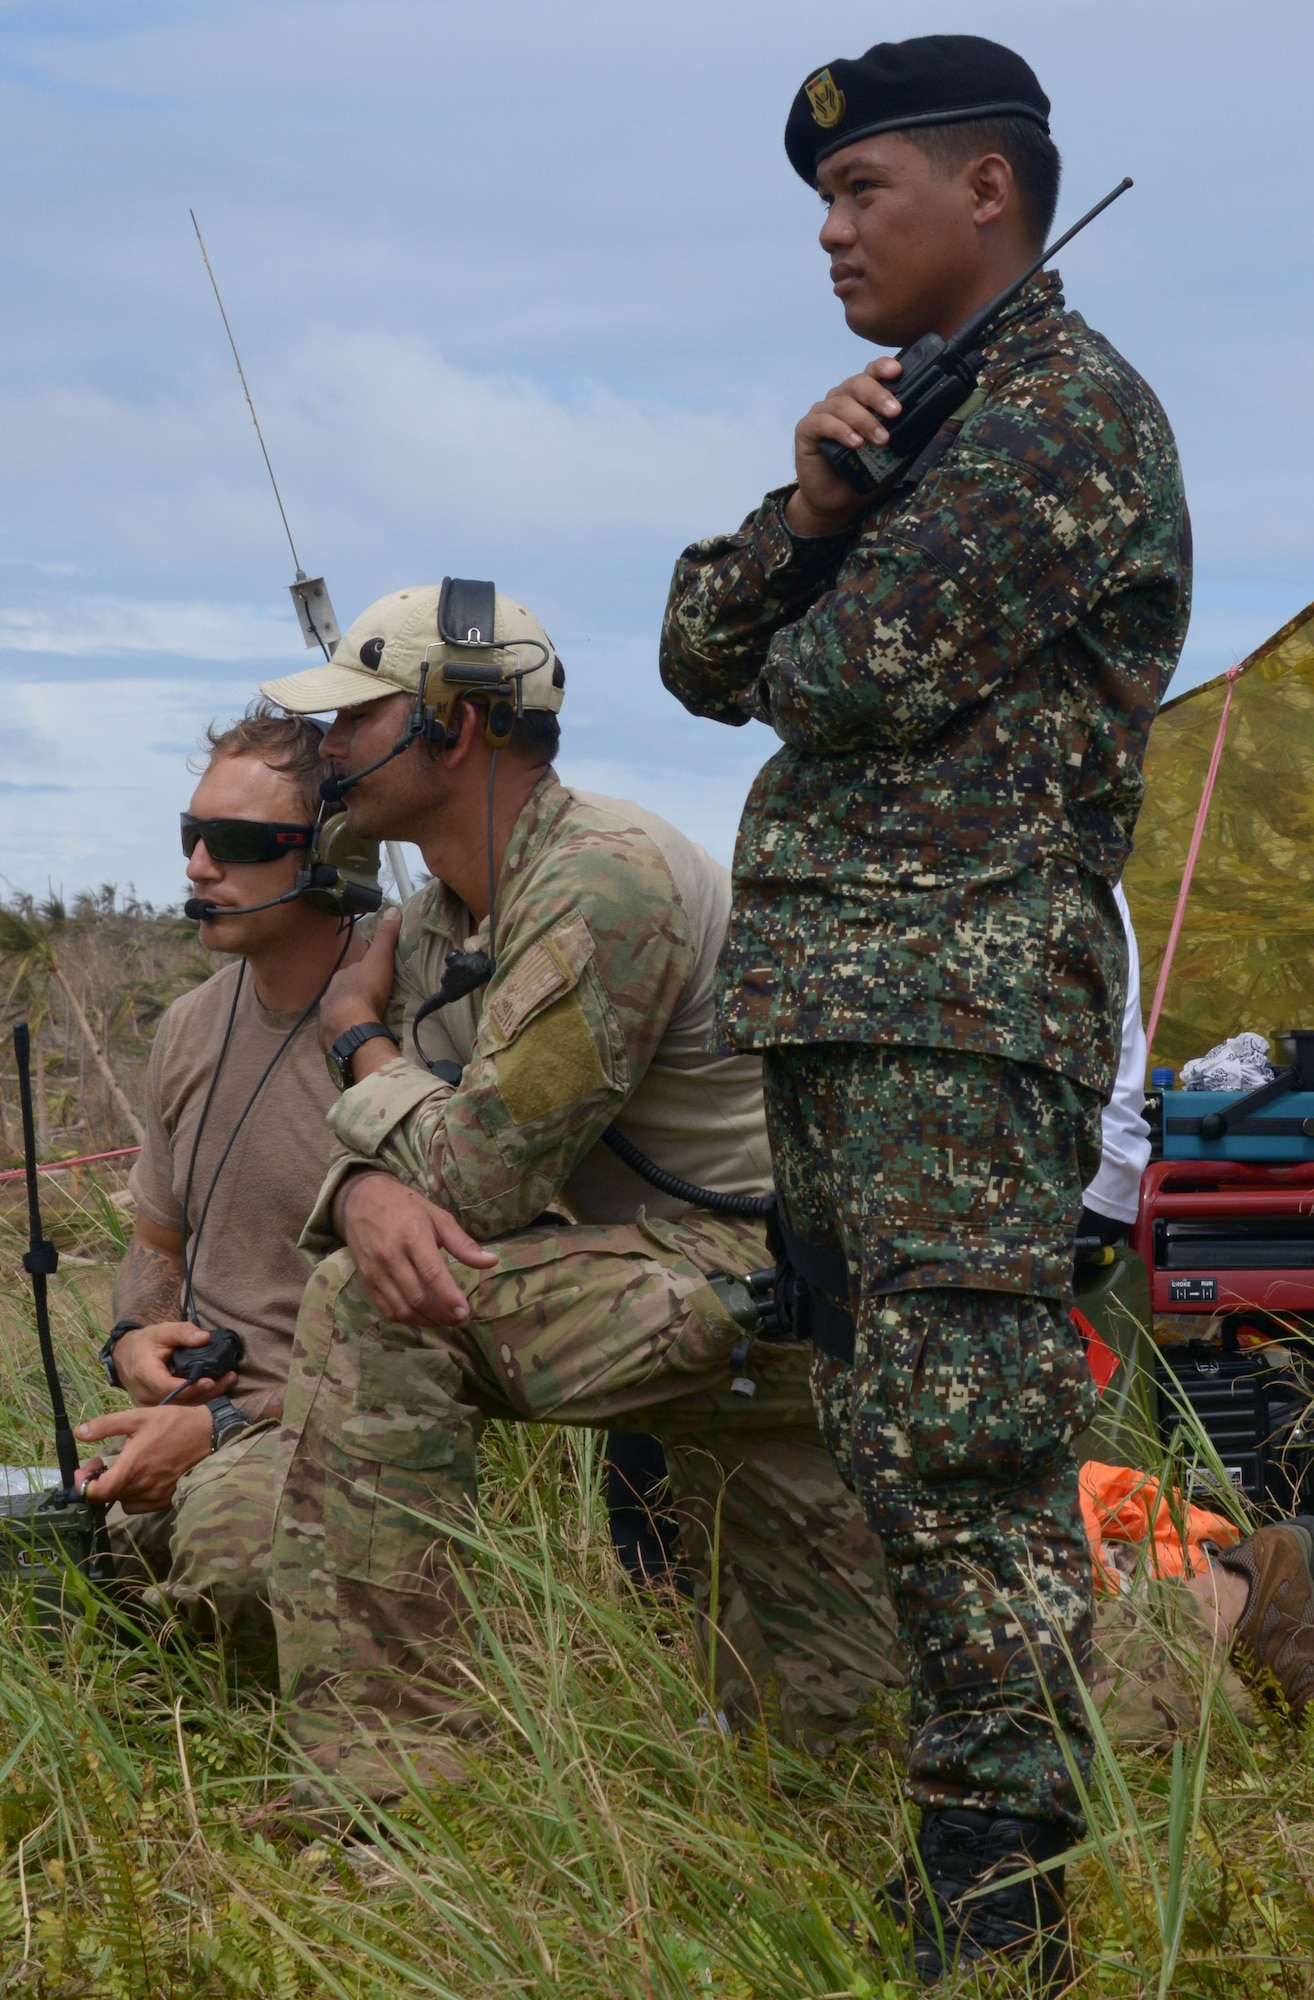 From left, Staff Sgt. Aaron Davis, Master Sgt. Tobin Berry and a member of the Armed Forces of the Philippines, direct air traffic Nov. 17, 2013, at Guiuan Airport, Republic of the Philippines. The special tactics Airmen, deployed from Kadena Air Base, Japan, worked with the Philippine military in support of Operation Damayan to open the airfield in the aftermath of Typhoon Haiyan. Davis and Barry are combat controllers with the 353rd Special Operations Group. (U.S. Air Force photo by Tech. Sgt. Kristine Dreyer) 